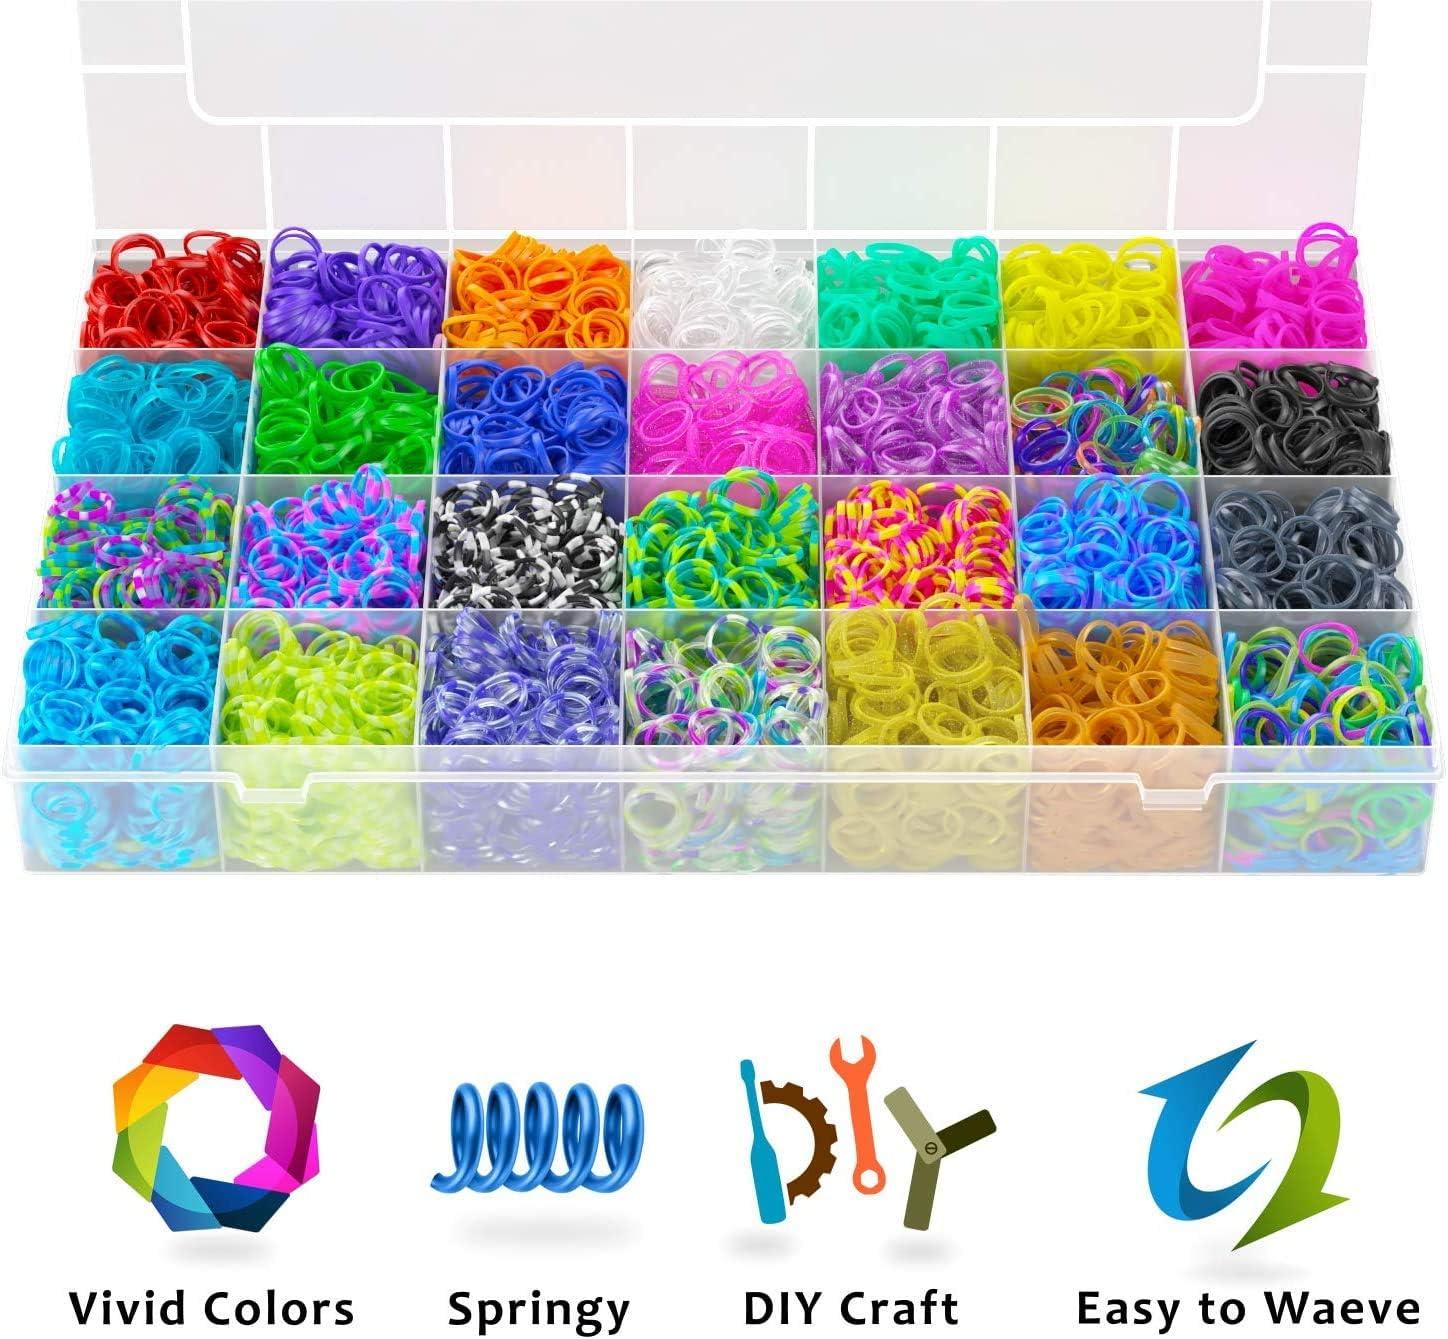 11,900+ Rubber Band Bracelet Refill Kit - 11,000 Premium Loom Bands in 28  Bright Colors, 600 S-Clips, 200 Beads, 30 Charms, 52 ABC Beads - Loom  Bracelet Making Kit in a Huge Giftable Case - Yahoo Shopping